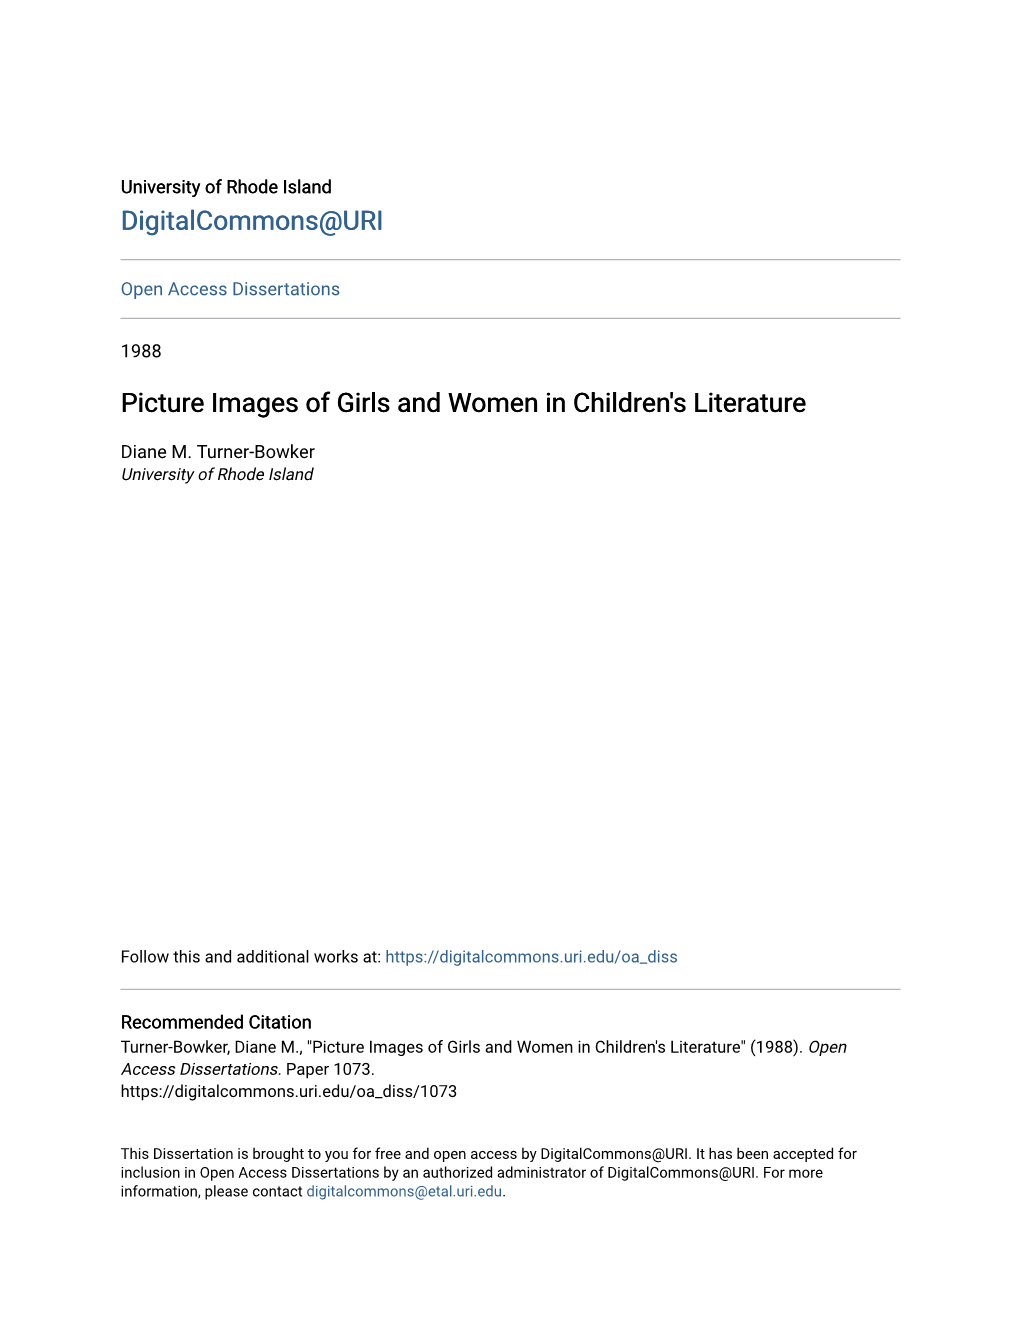 Picture Images of Girls and Women in Children's Literature